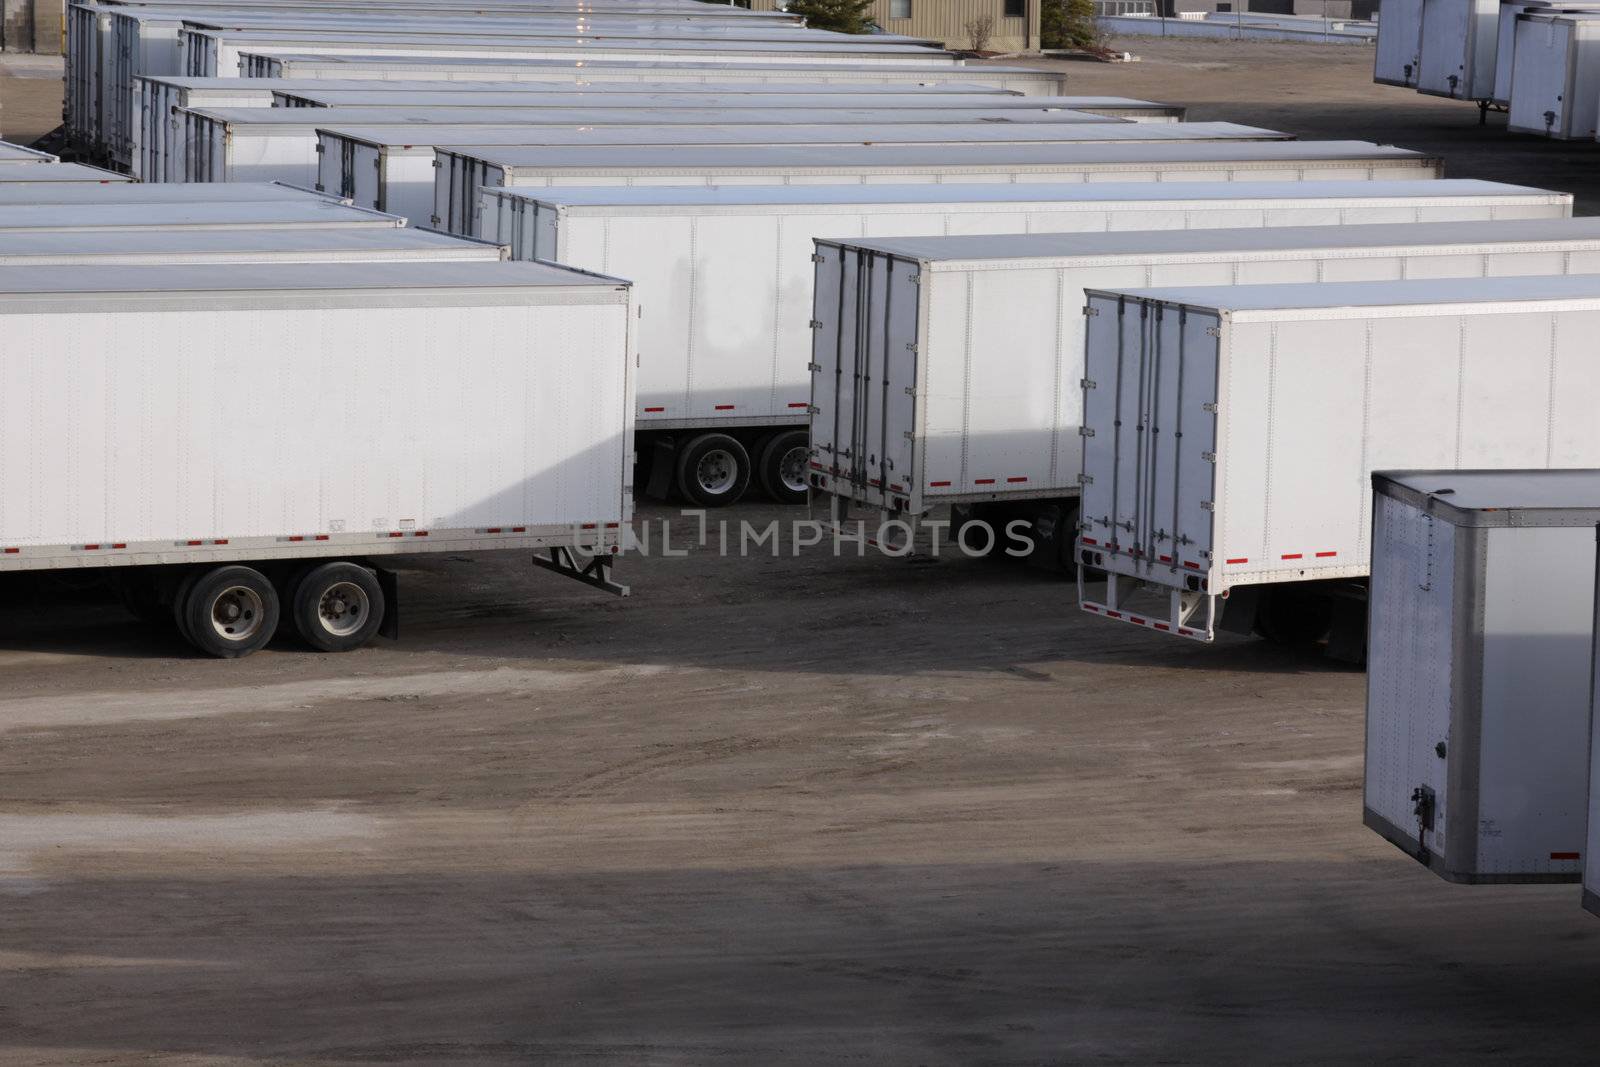 A parking lot with lots of transport trucks and trailers.